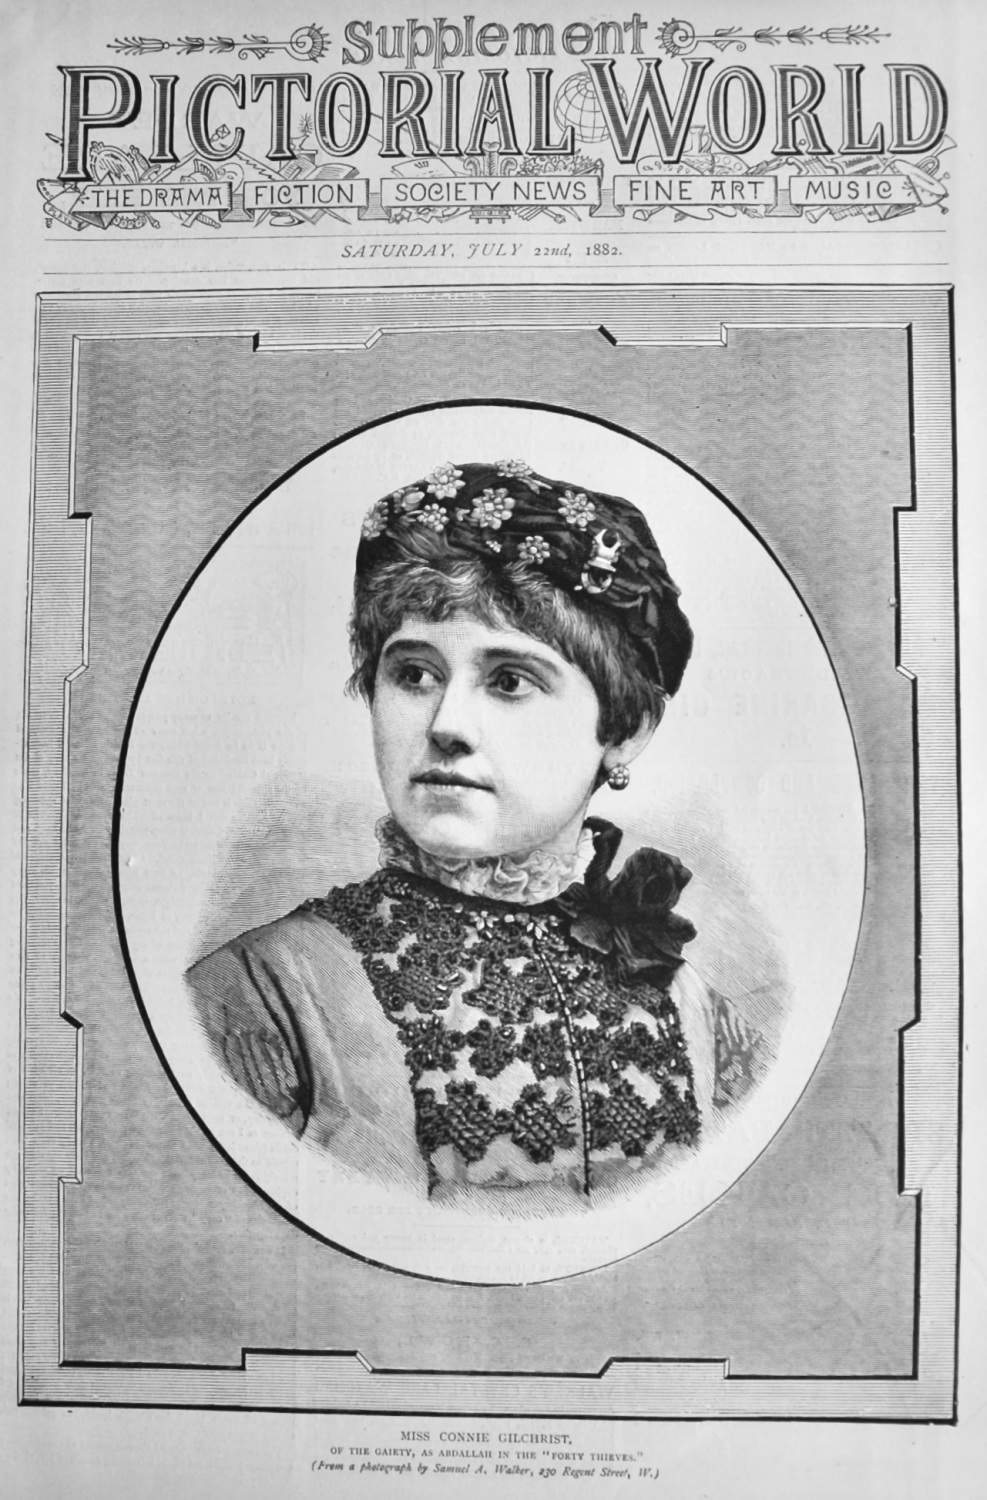 Miss Connie Gilchrist, of the Gaiety, as Abdallah in the 